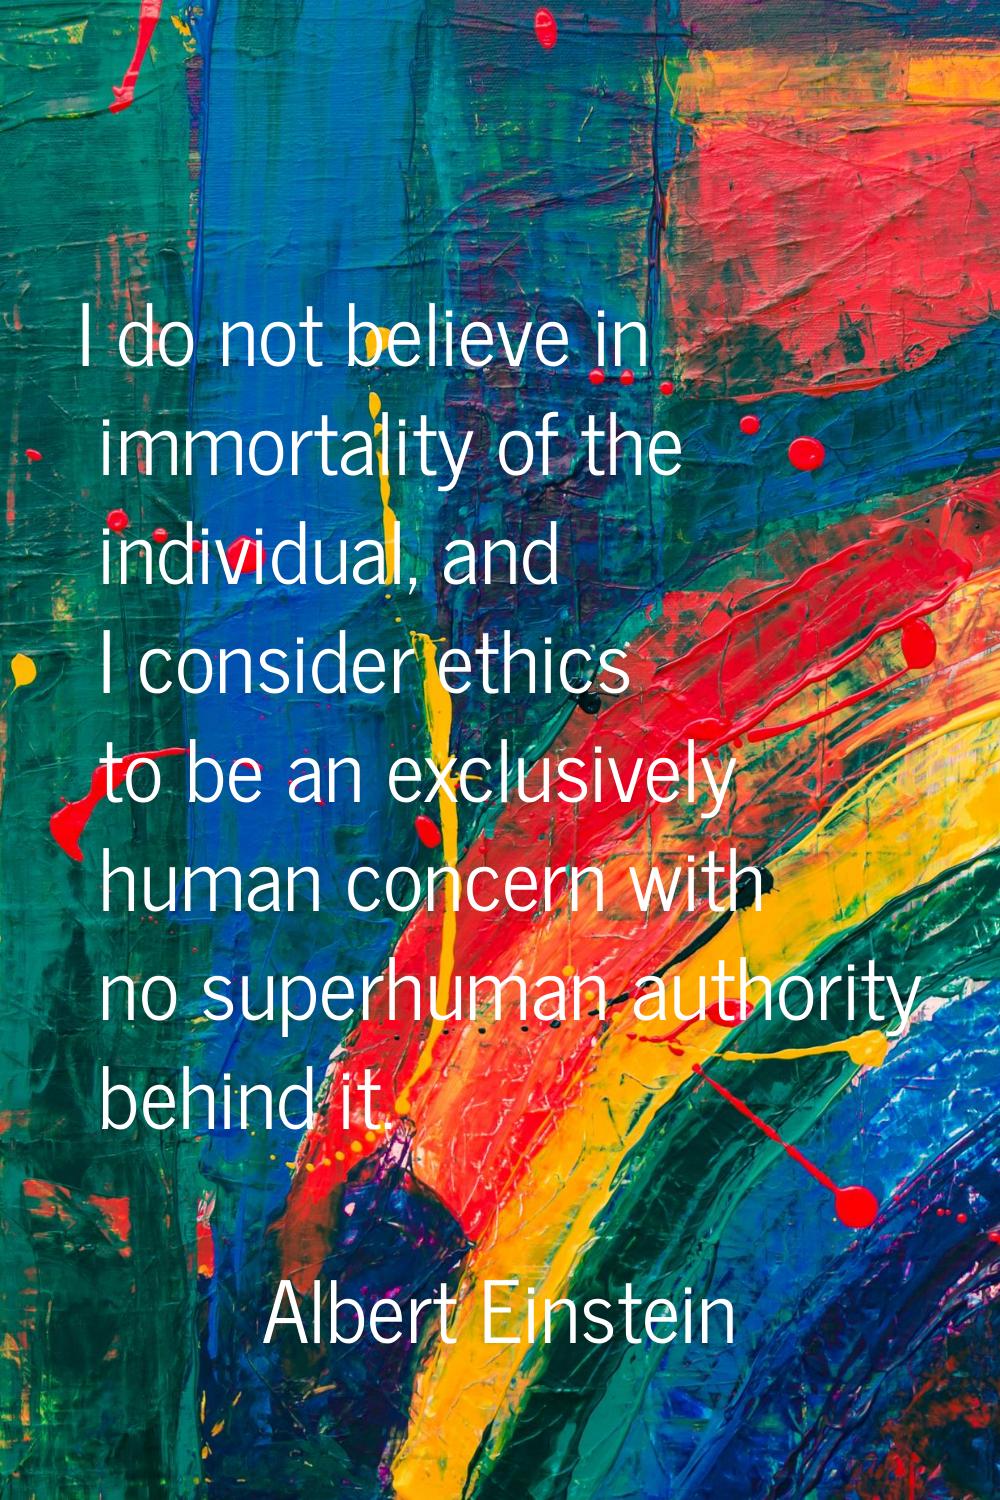 I do not believe in immortality of the individual, and I consider ethics to be an exclusively human